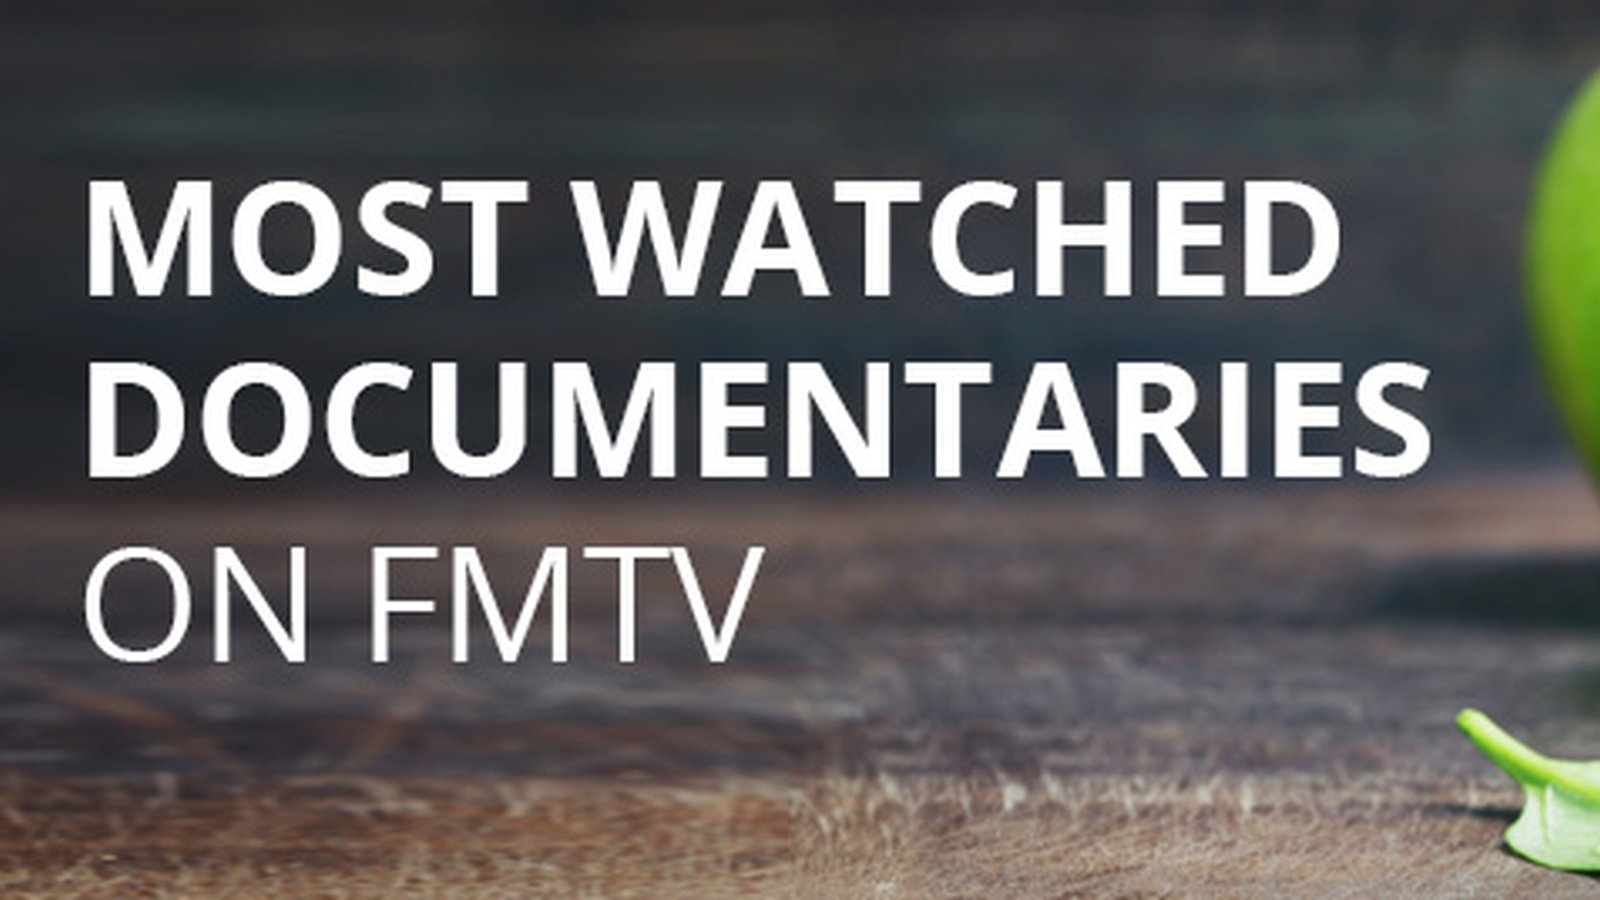 10 Of The Most Watched Documentaries On FMTV